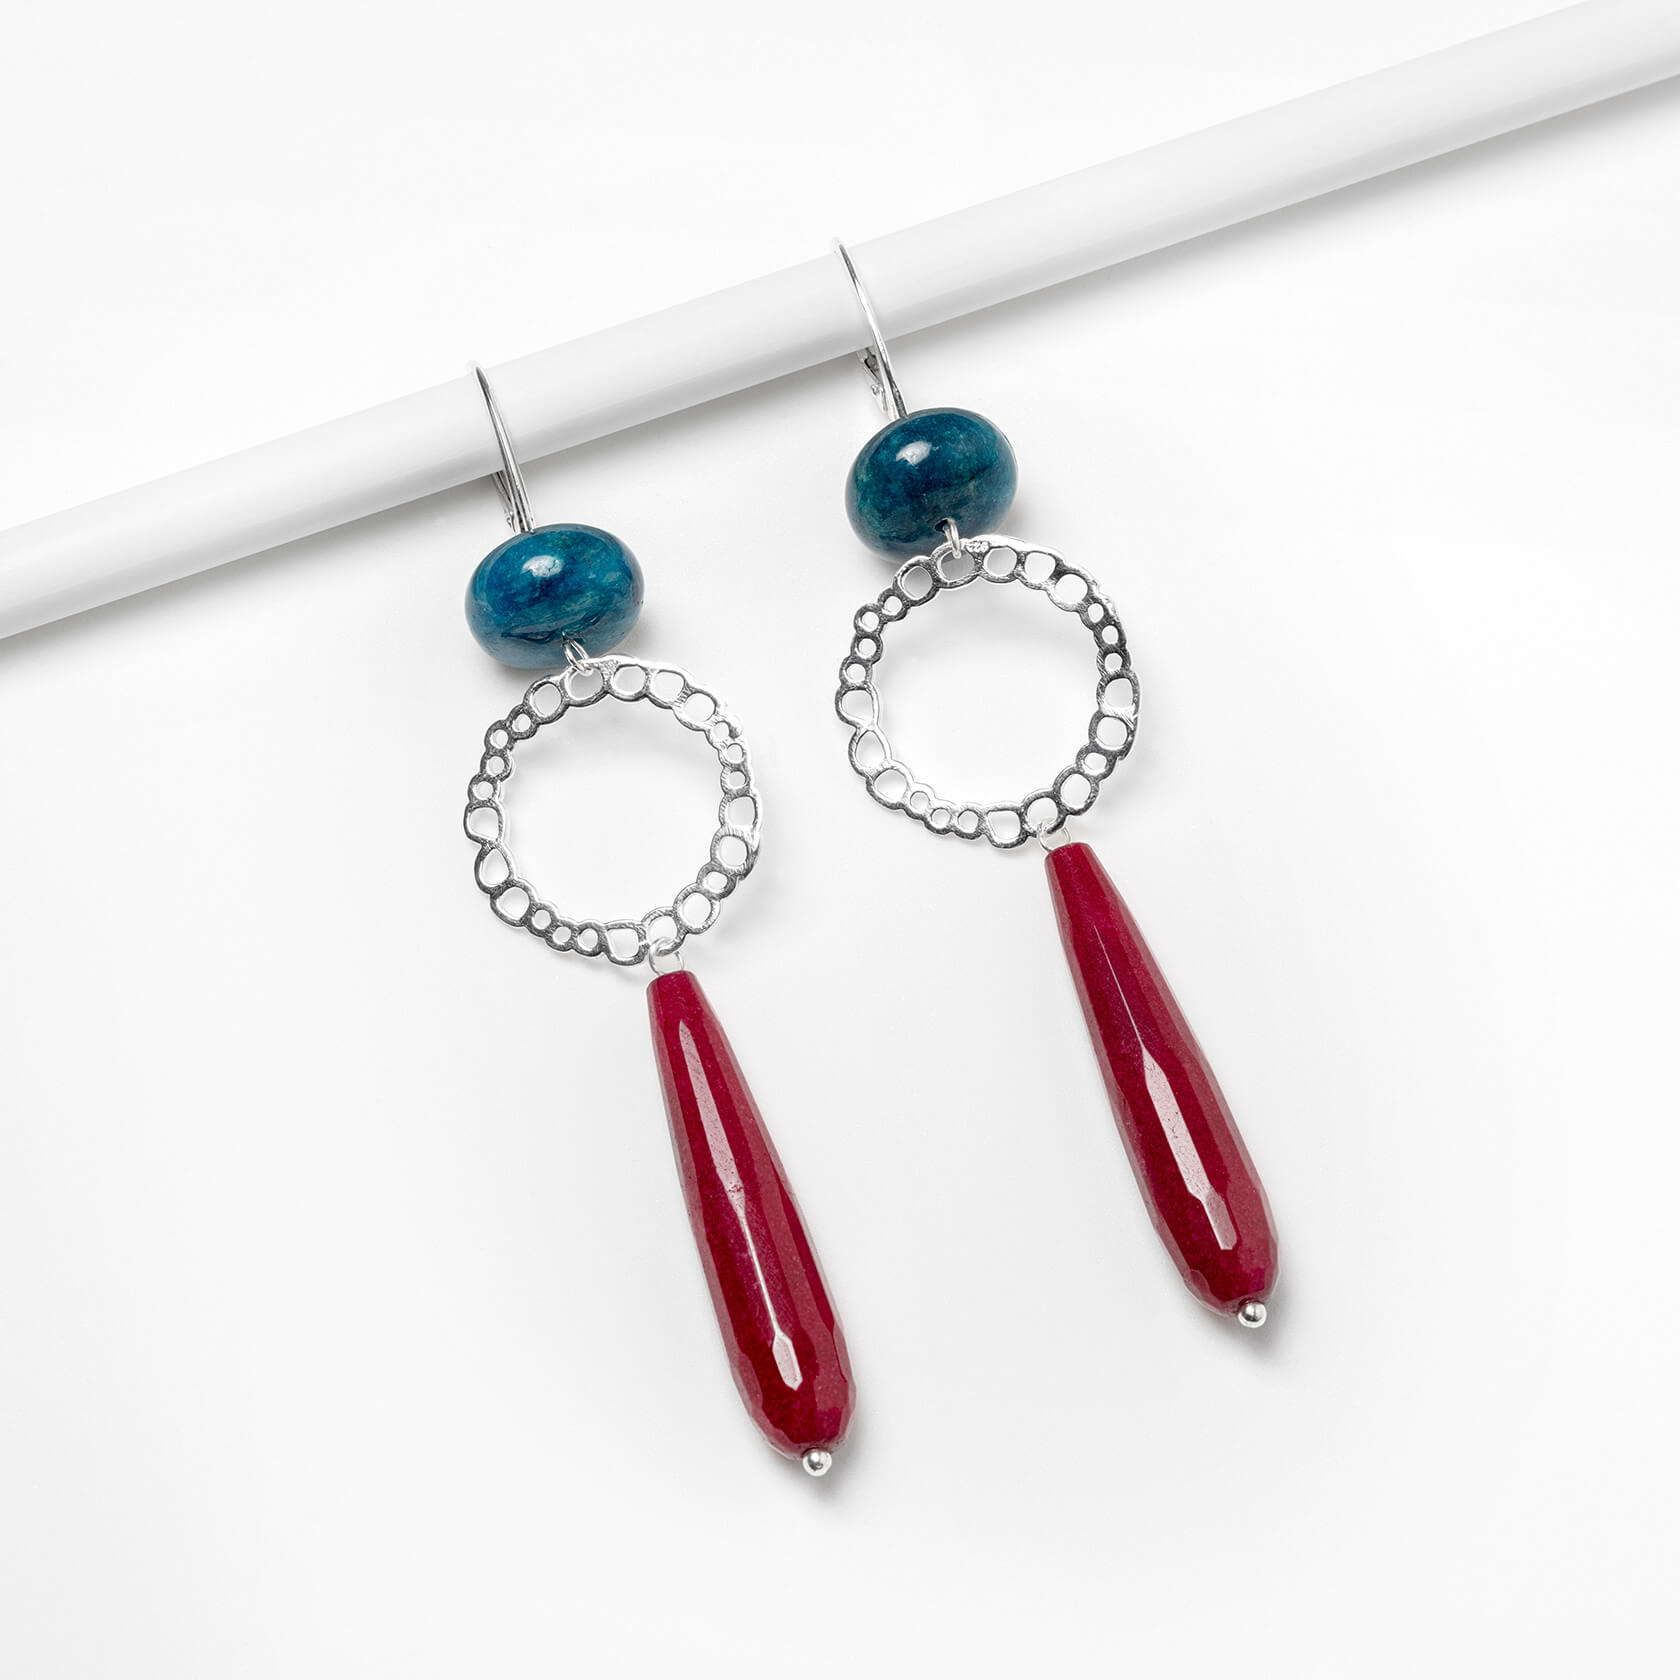 Blue apatite and red agate earrings